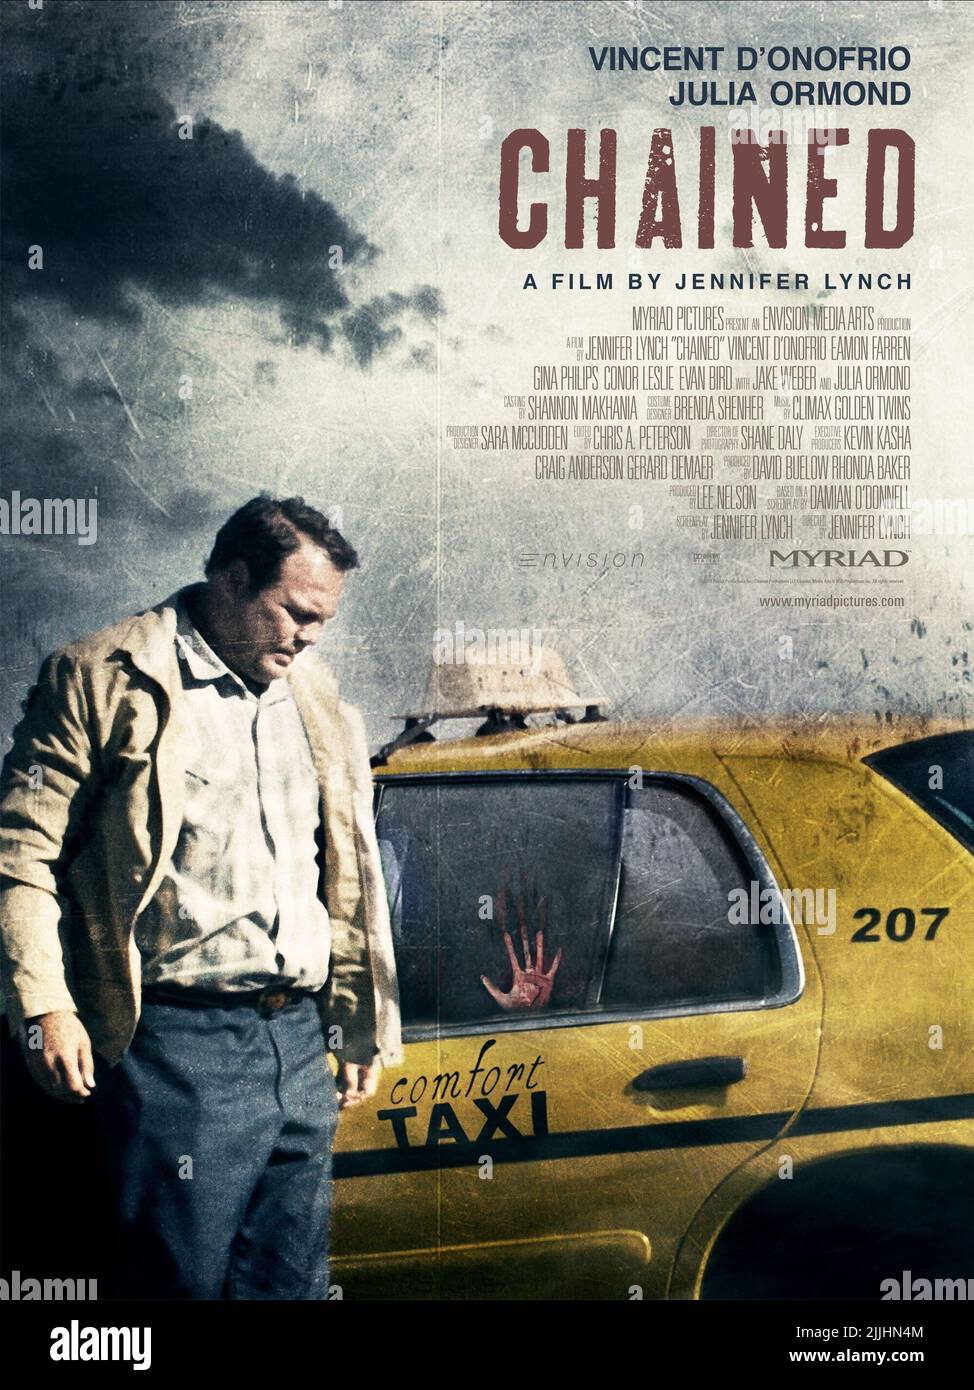 VINCENT D'ONOFRIO POSTER, CHAINED, 2012 Stock Photo